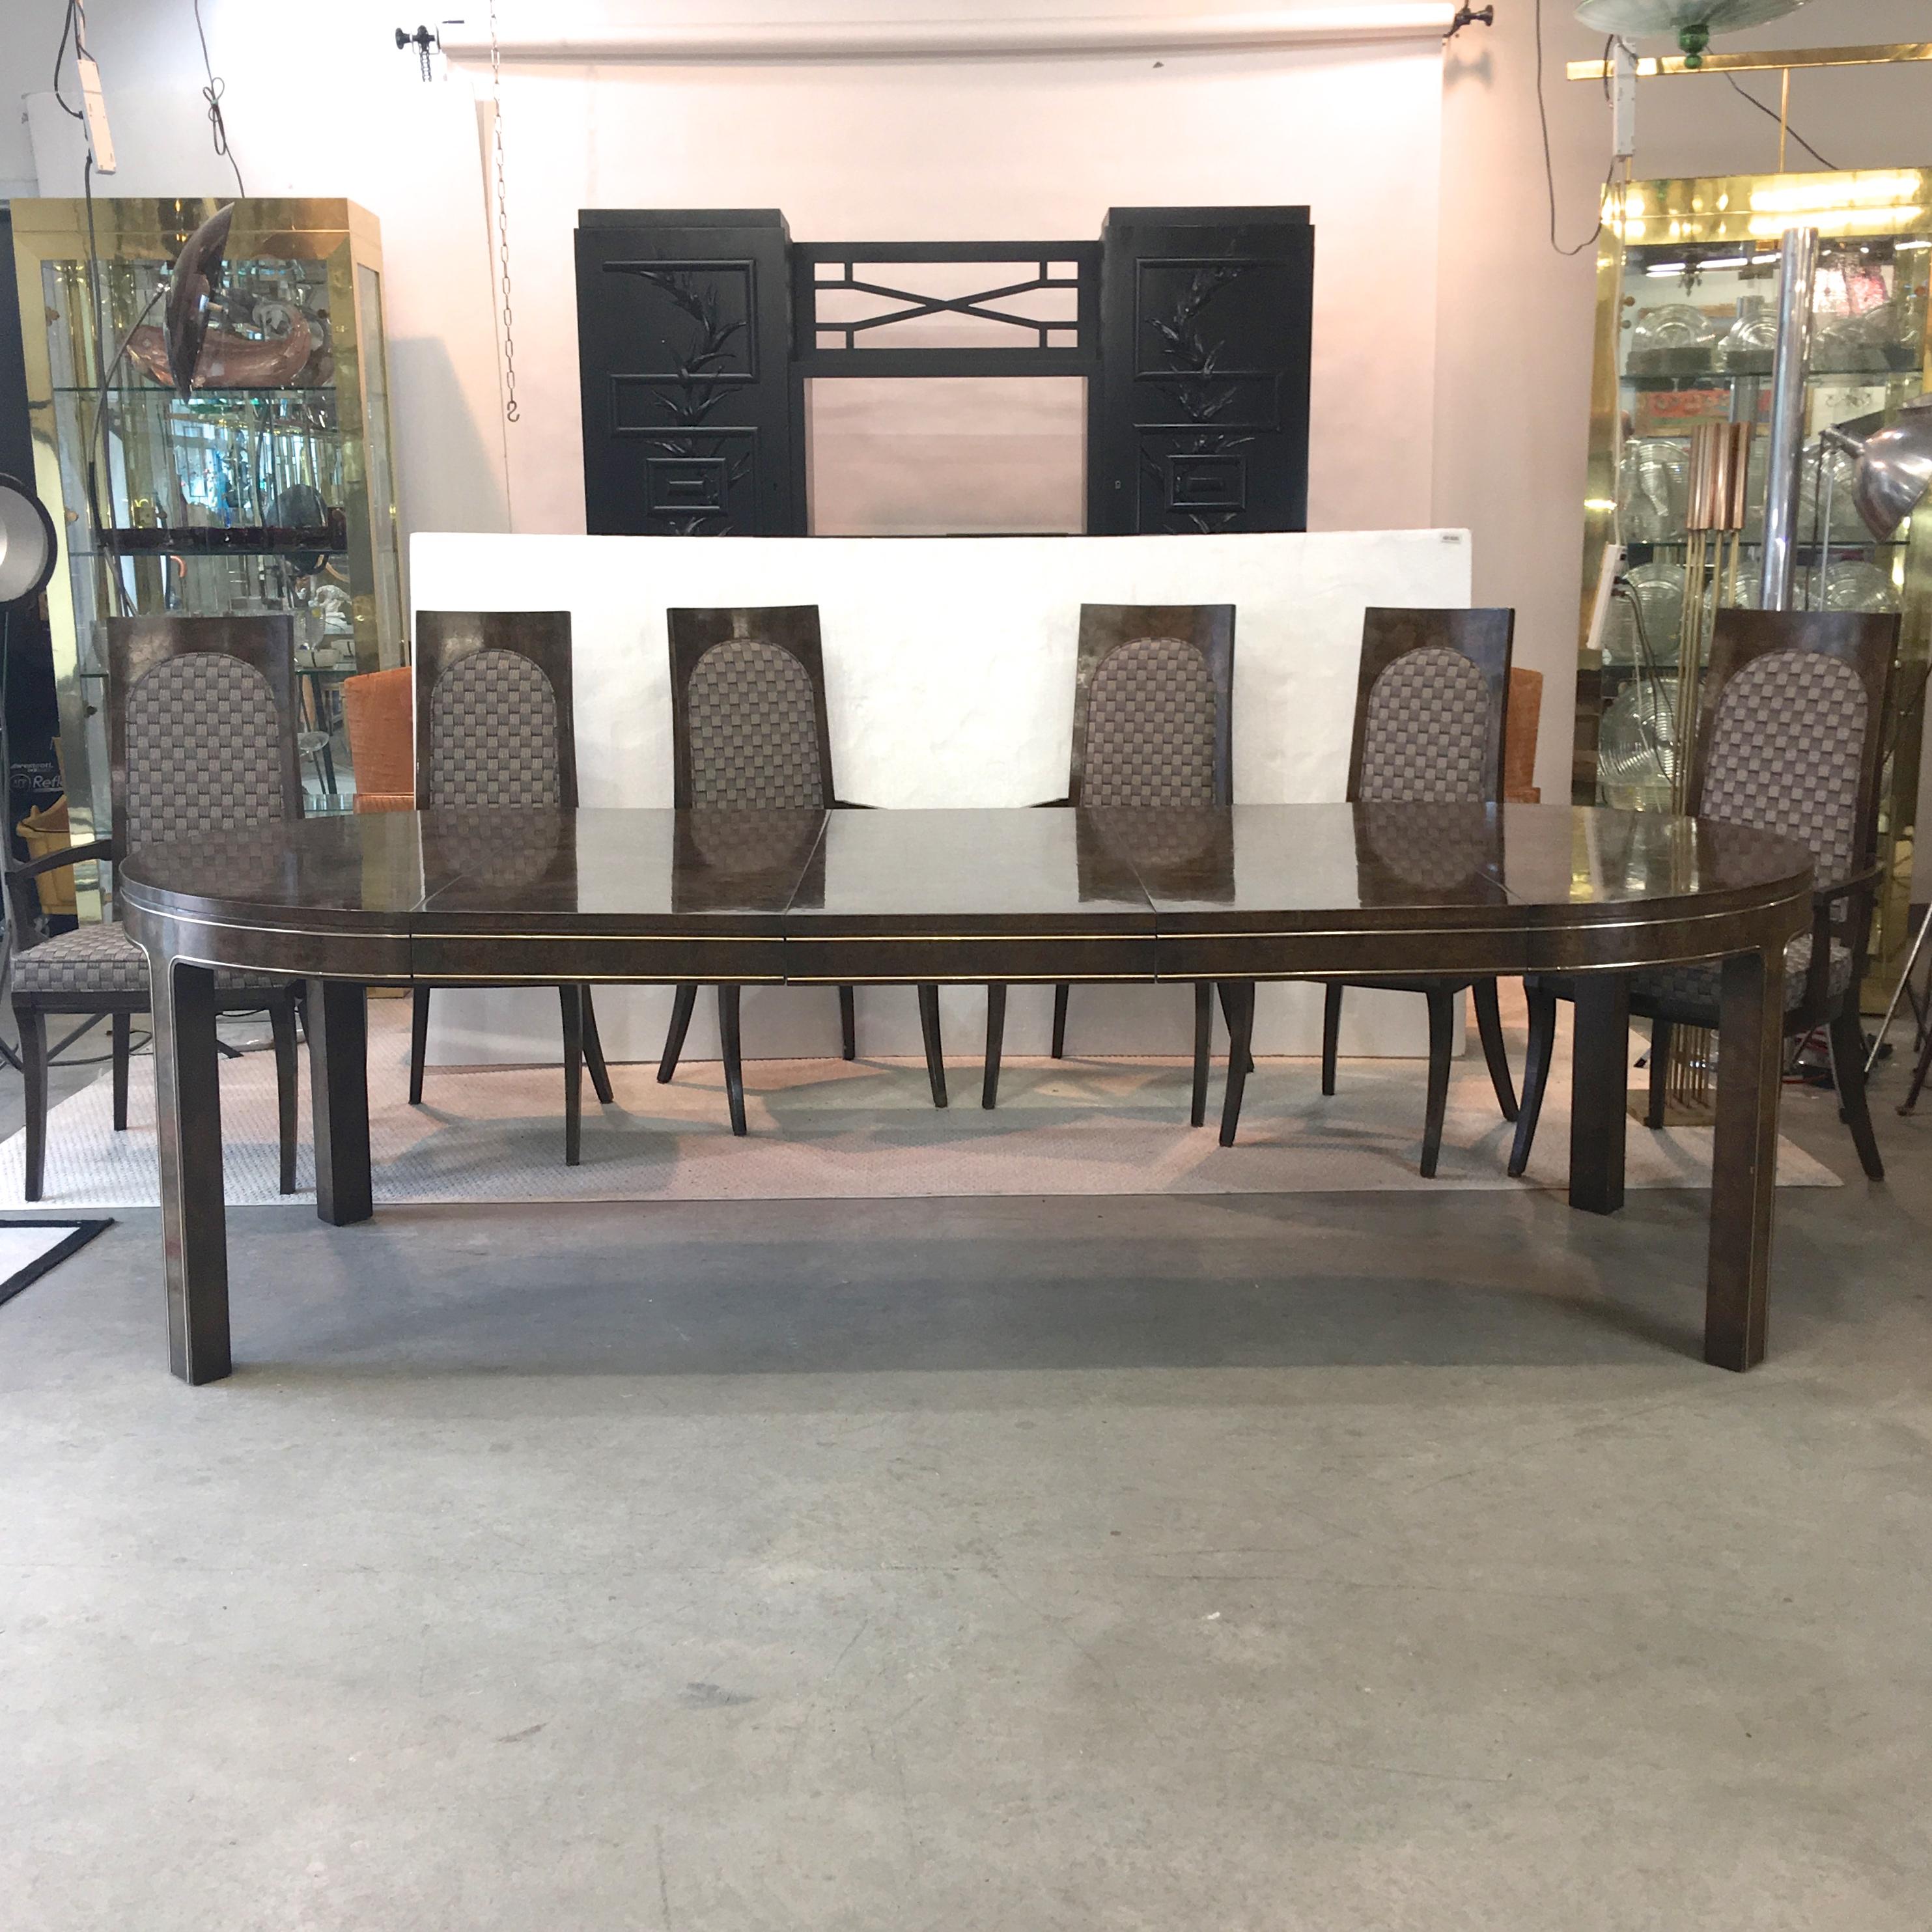 HOLIDAY SALE


Vintage 1960s dining table and six chairs designed by William Doezema for Mastercraft retailed by Charak of Boston. Briar root burl veneer although frequently identified as Amboyna. Brass trim all along apron up and around legs. Table